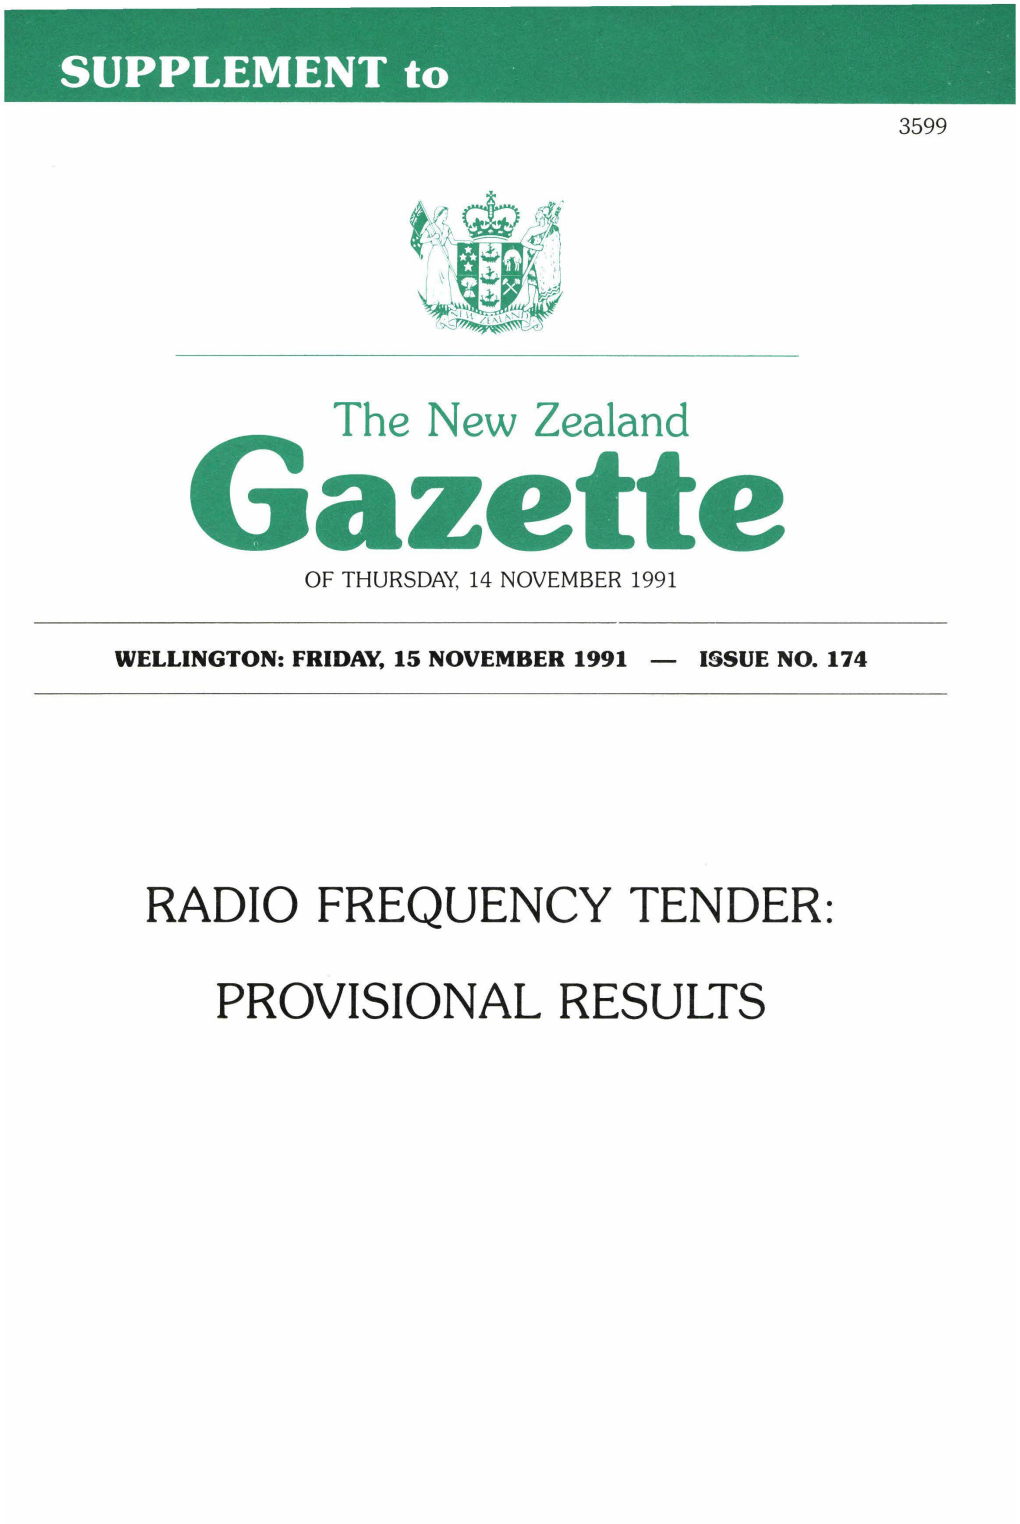 Radio Frequency Tender: Provisional Results